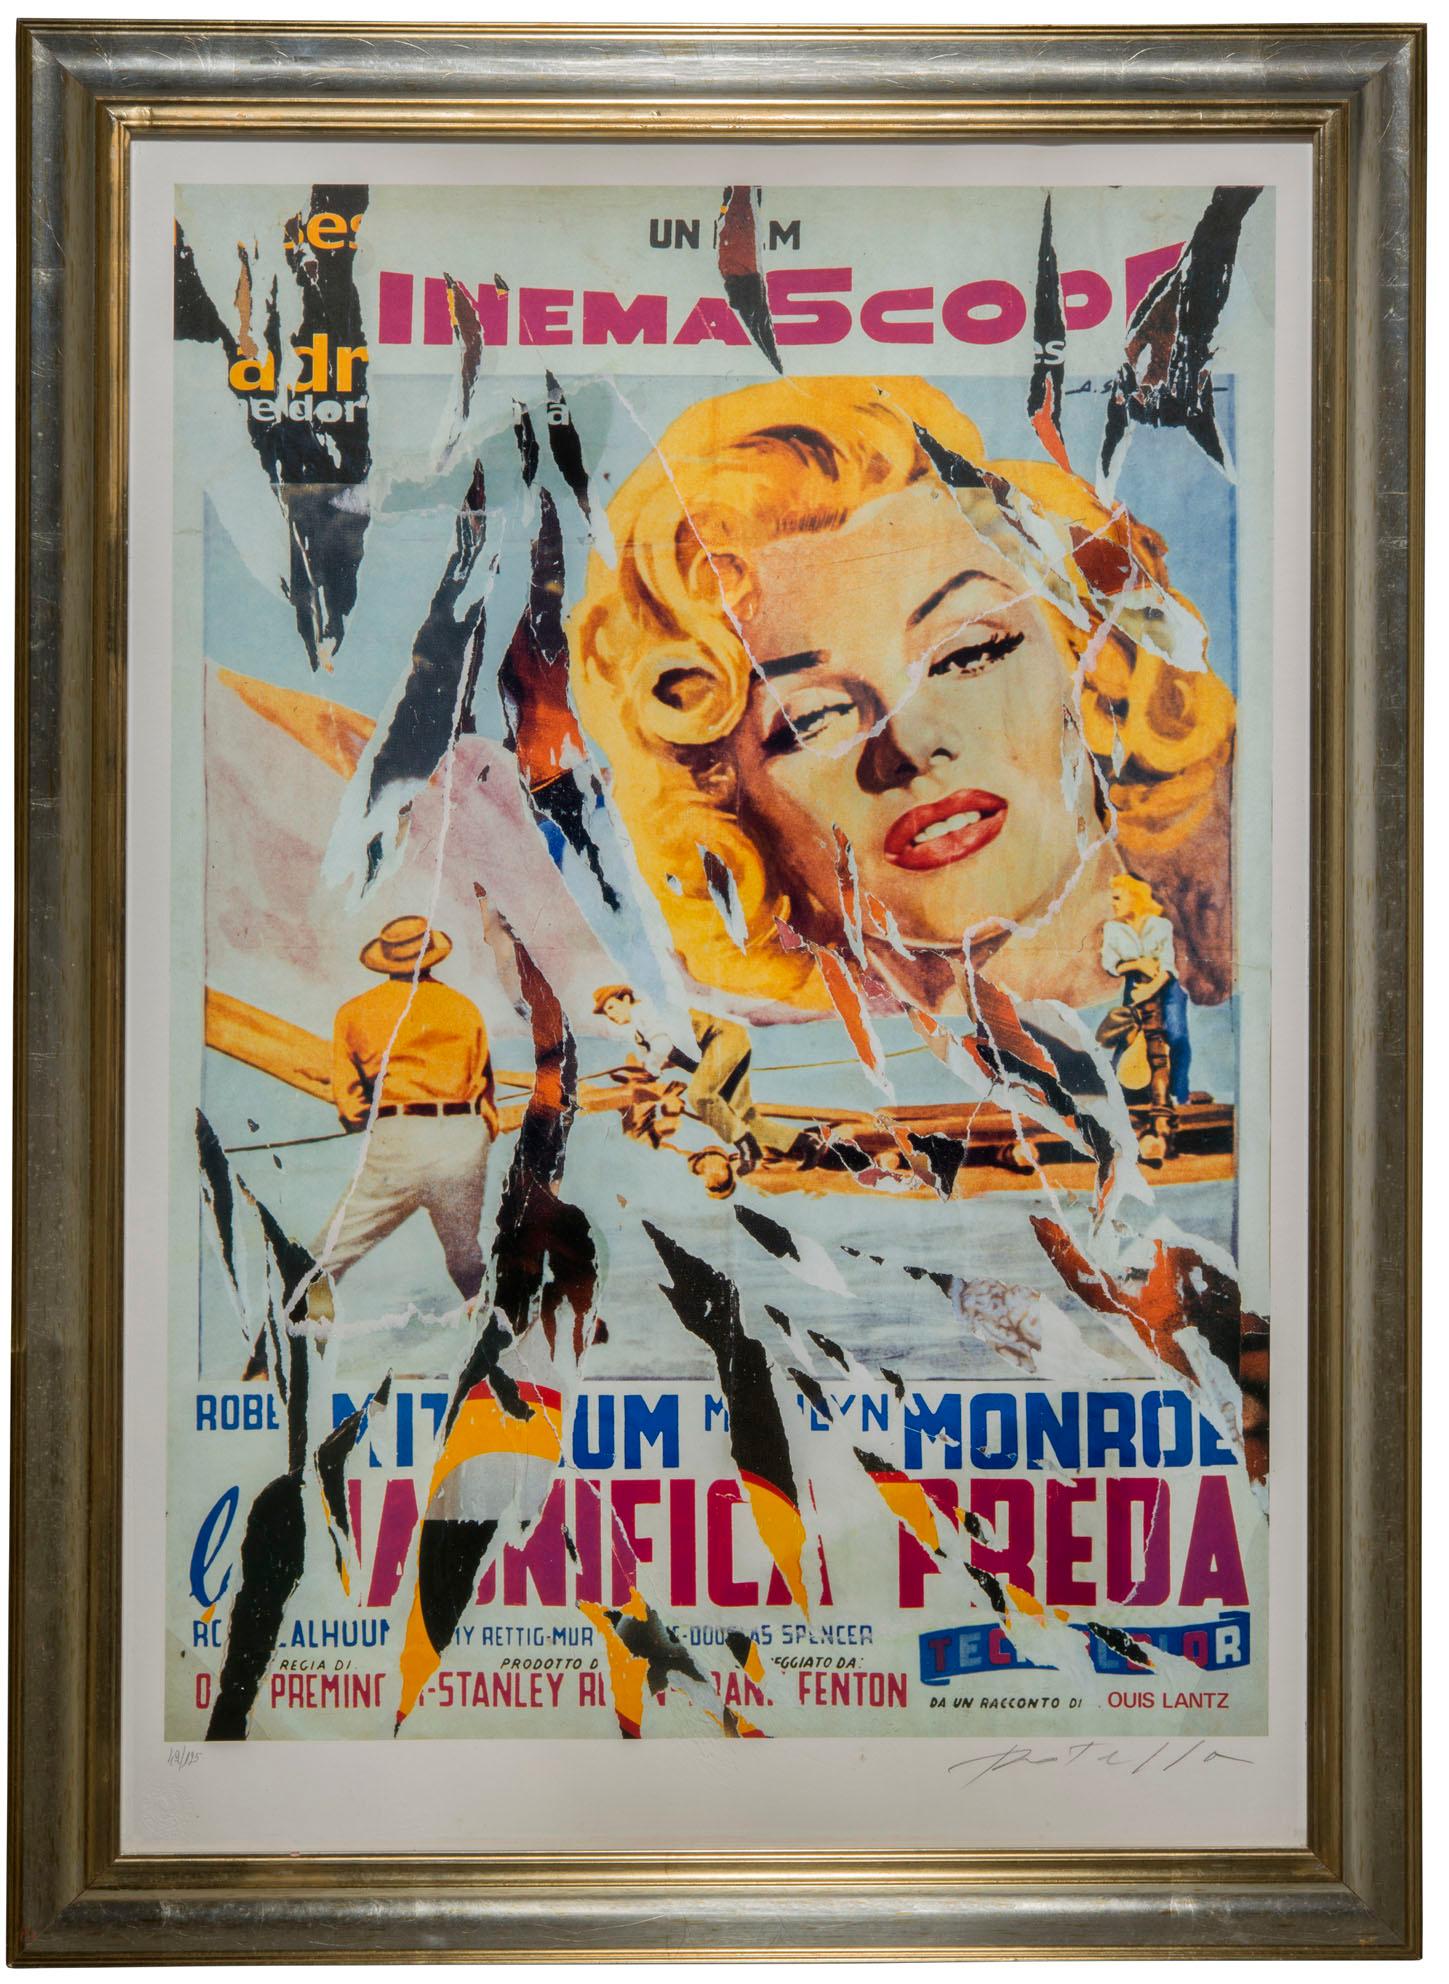 Mimmo Rotella silkscreen printing
Title “Marilyn The magnificent prey”
Mimmo Rotella silkscreen print taken from the poster of the film 